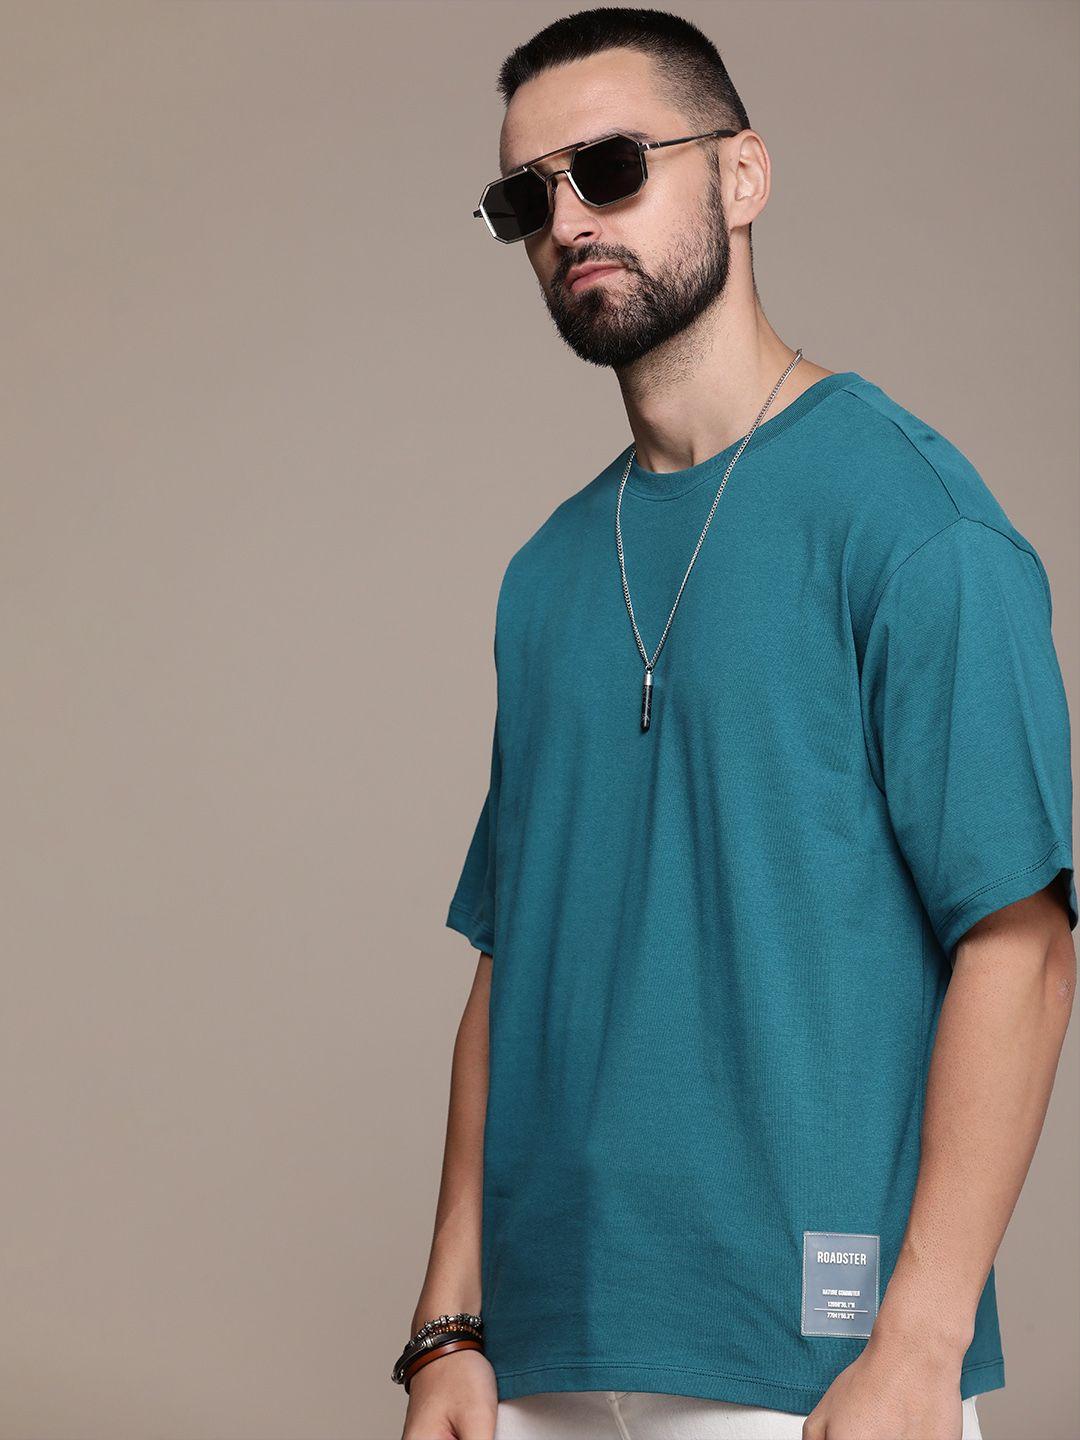 the roadster life co. pure cotton solid drop-shoulder sleeves casual t-shirt